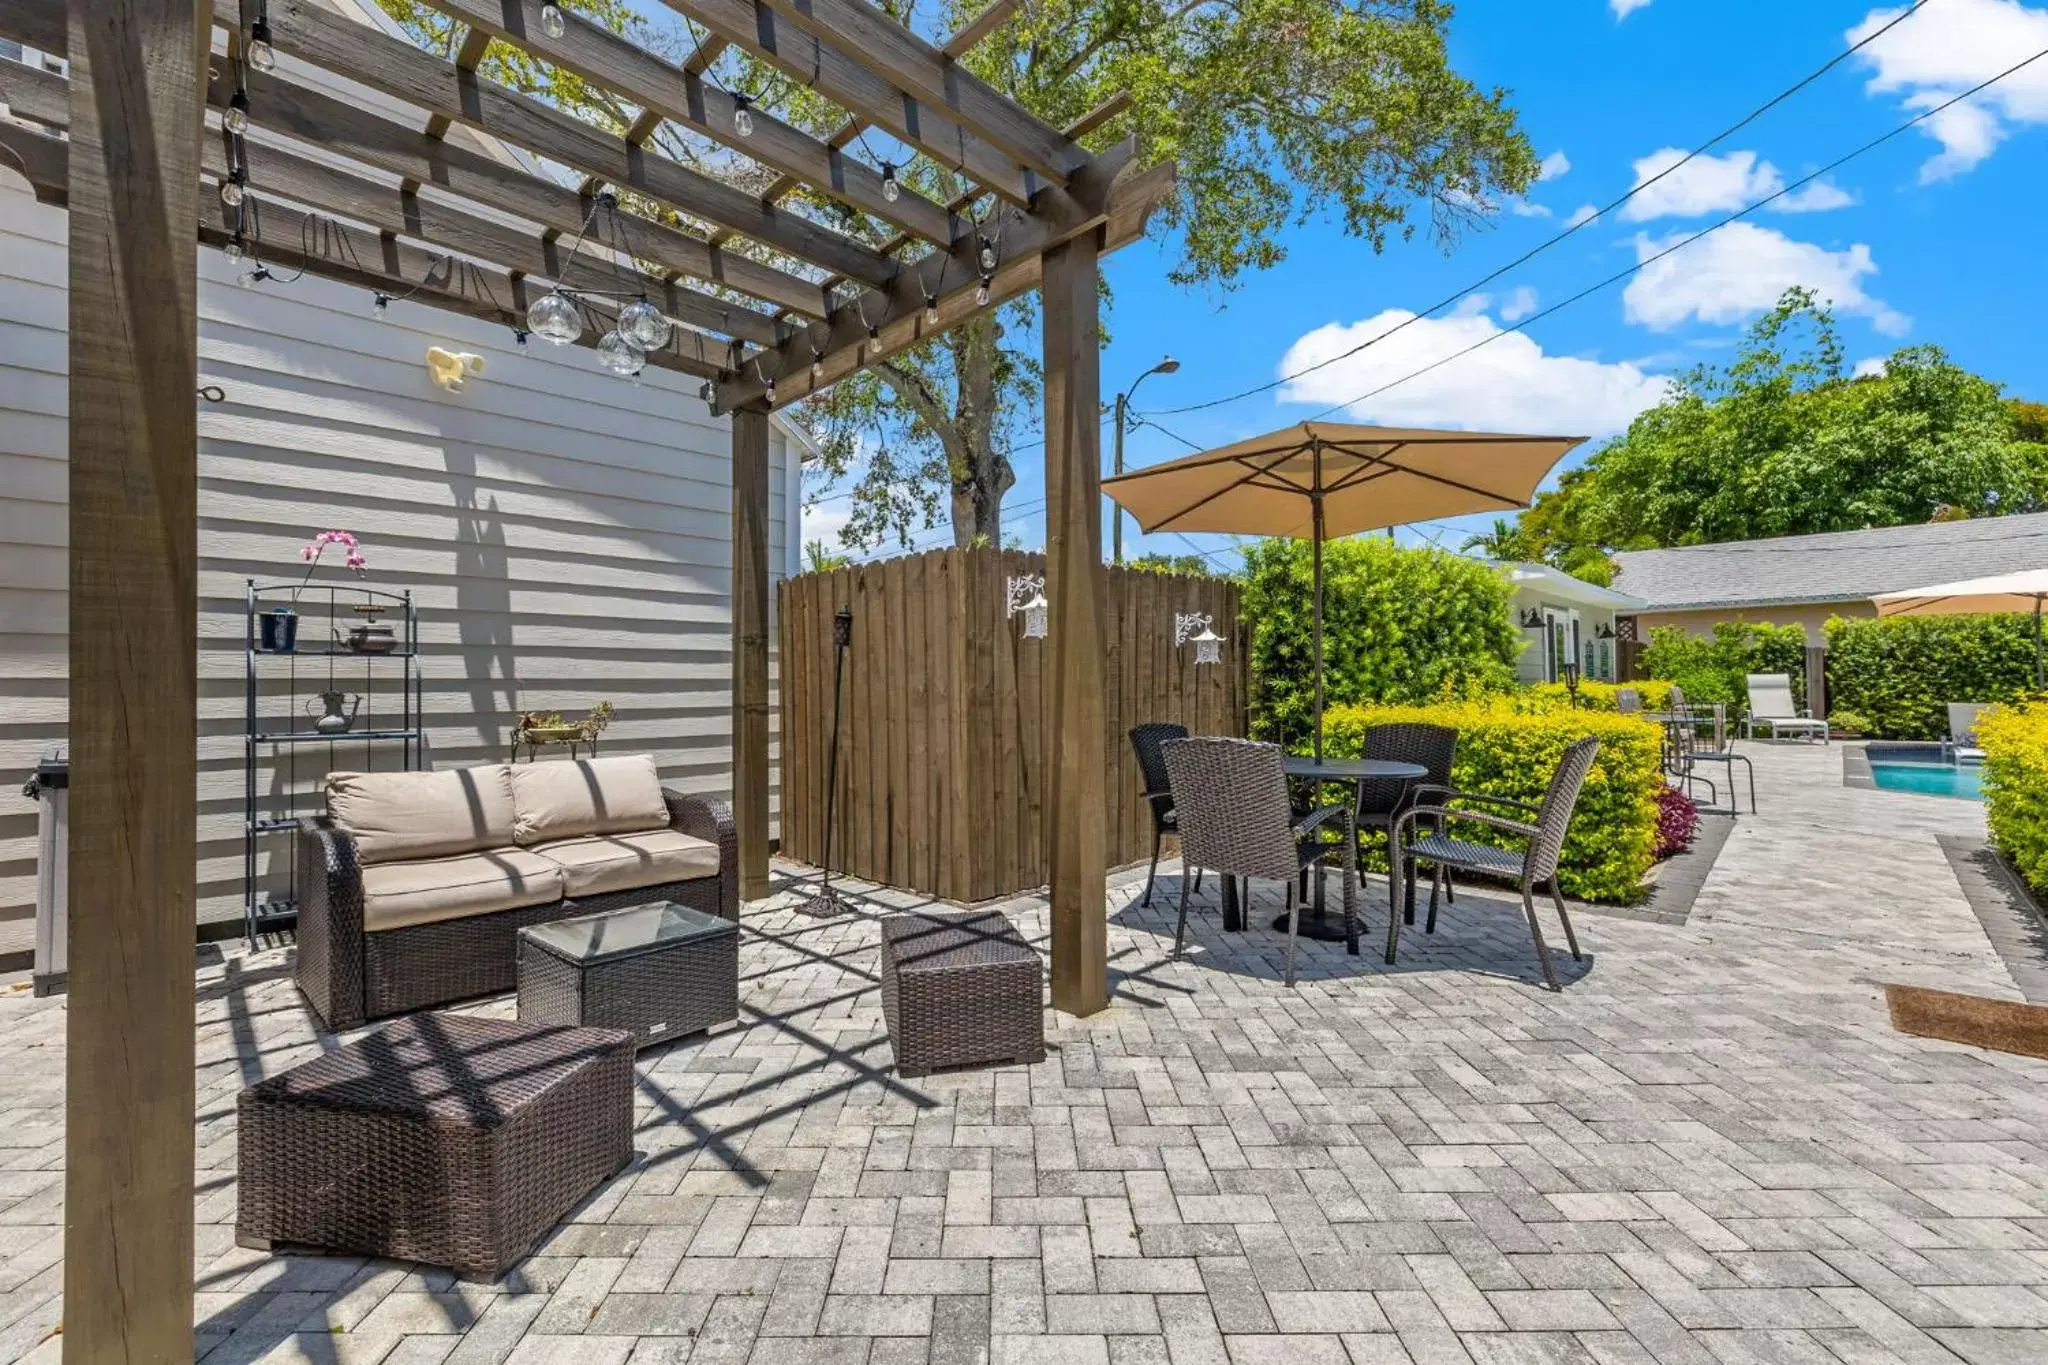 Summer, Patio/Outdoor Area in The Kenwood Gables